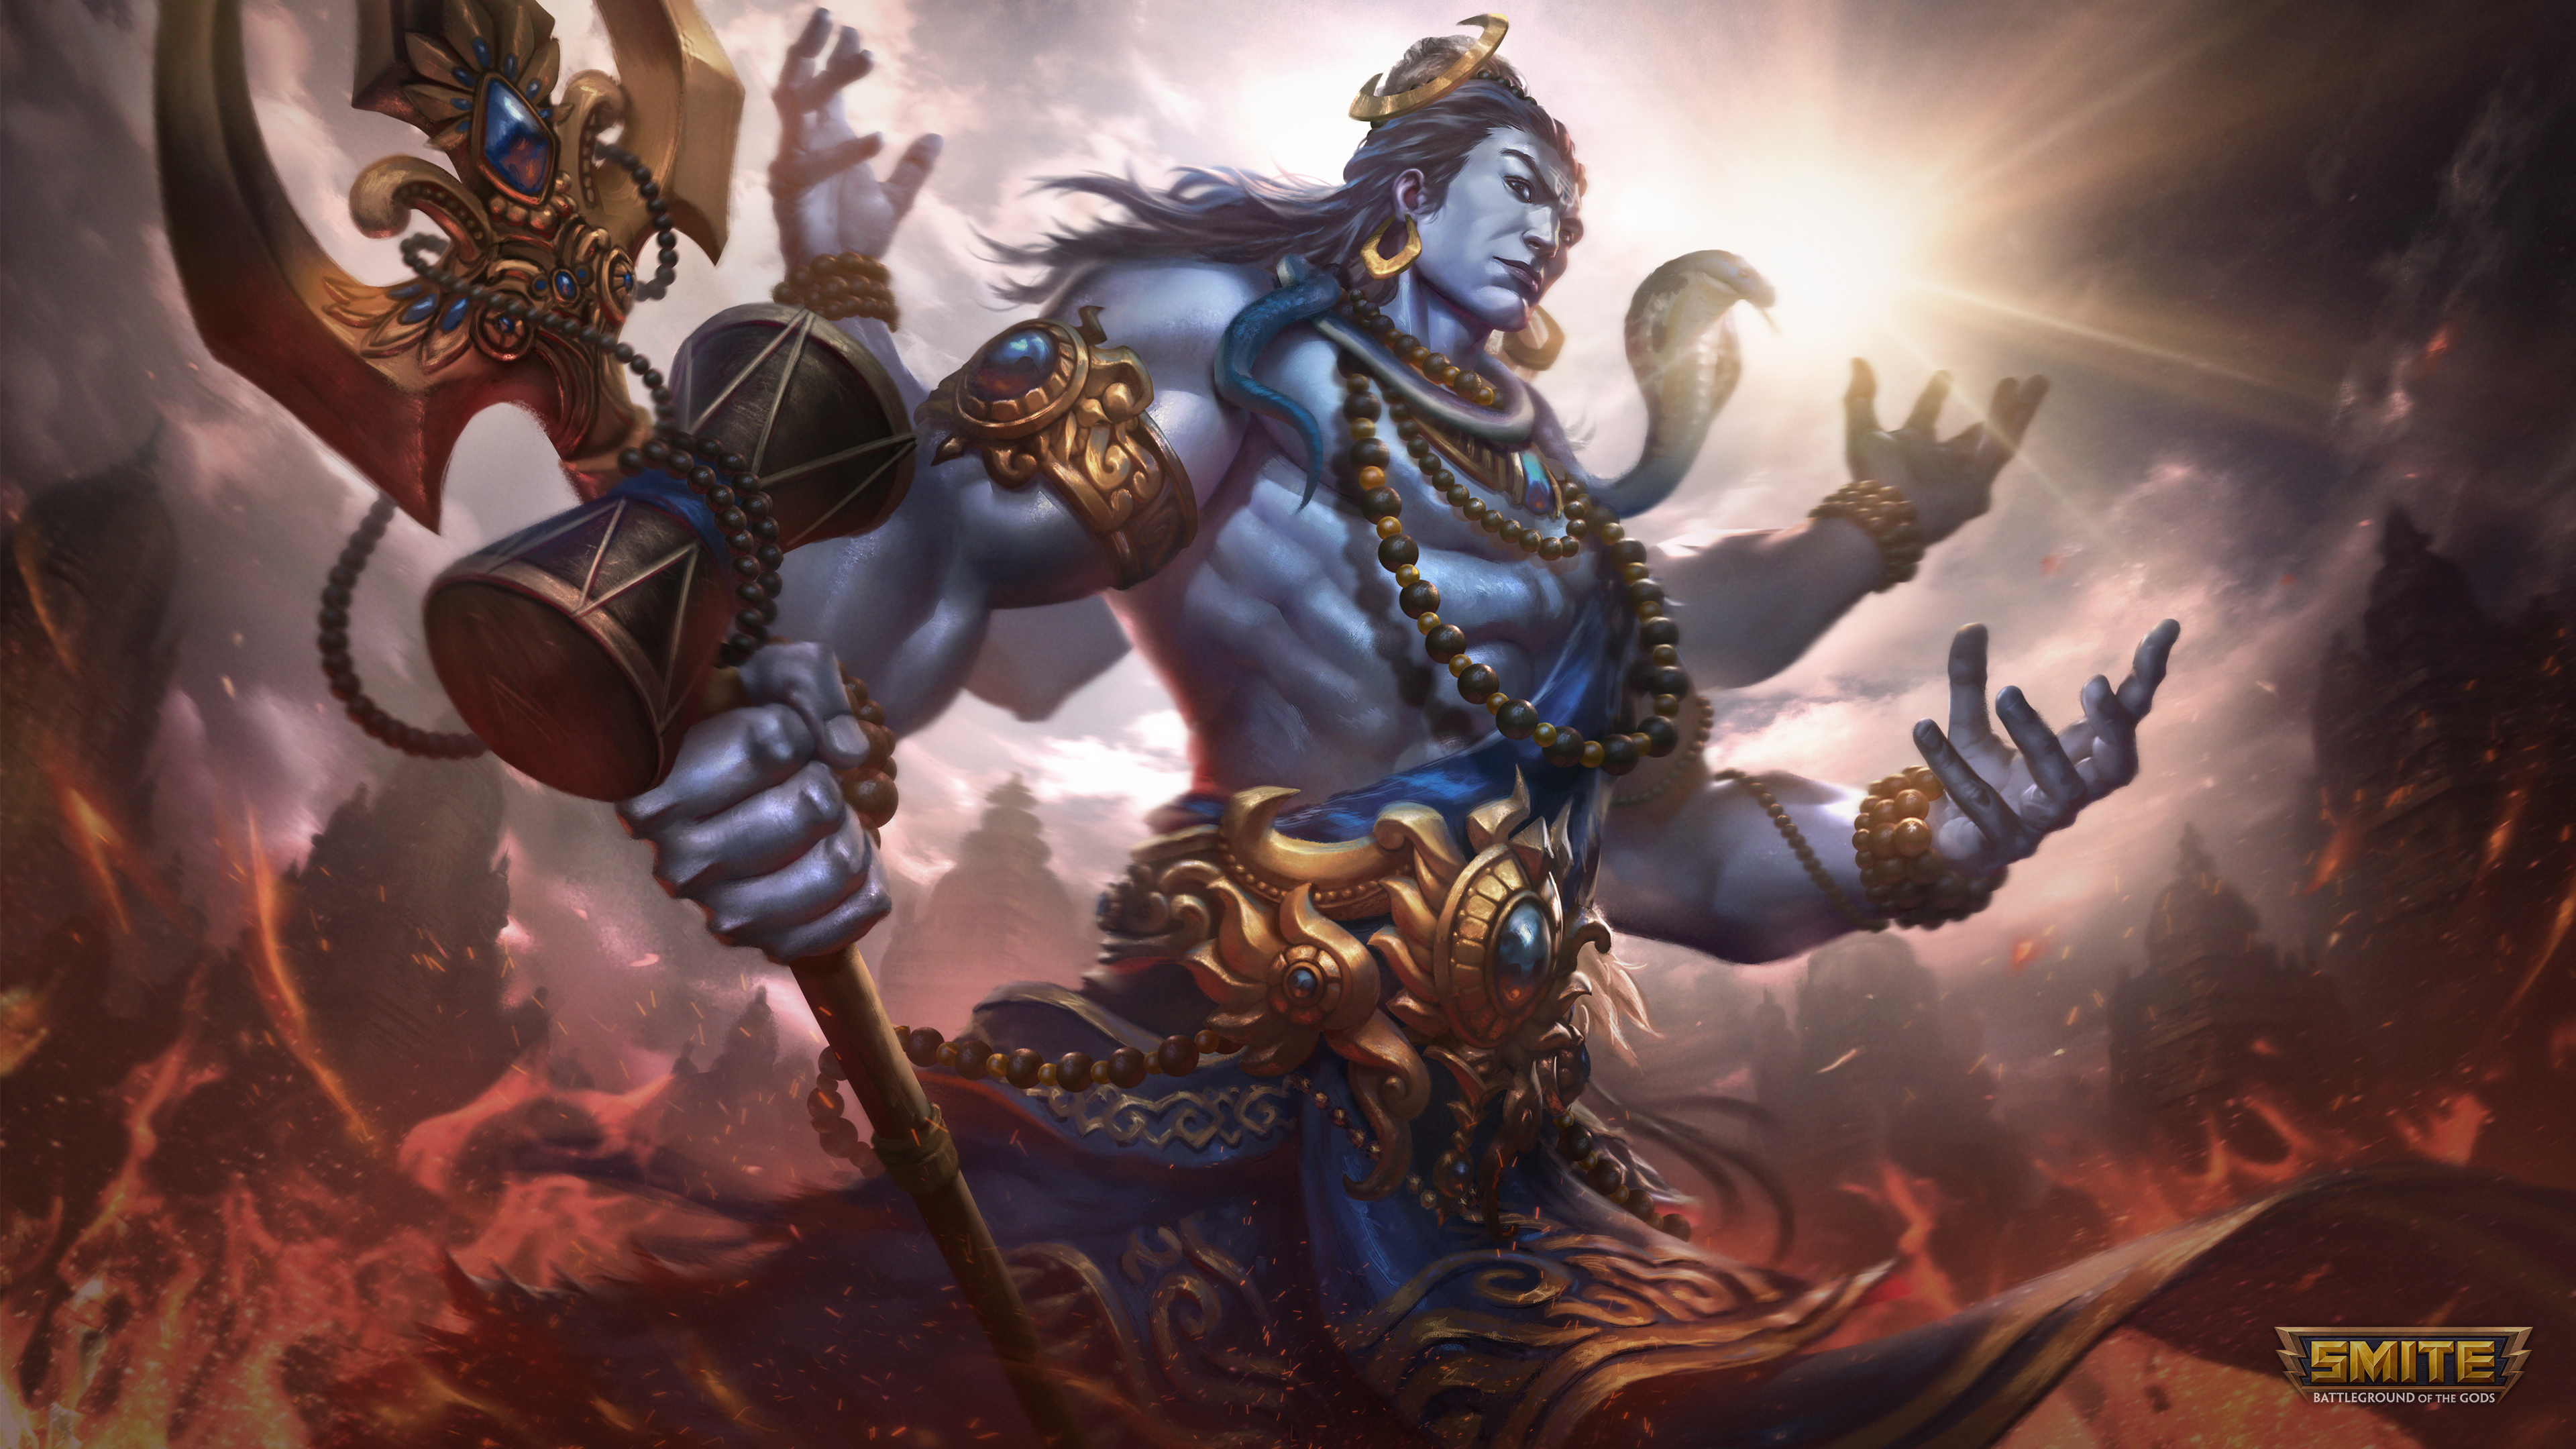 Video Game Smite HD Wallpaper Background Image. 